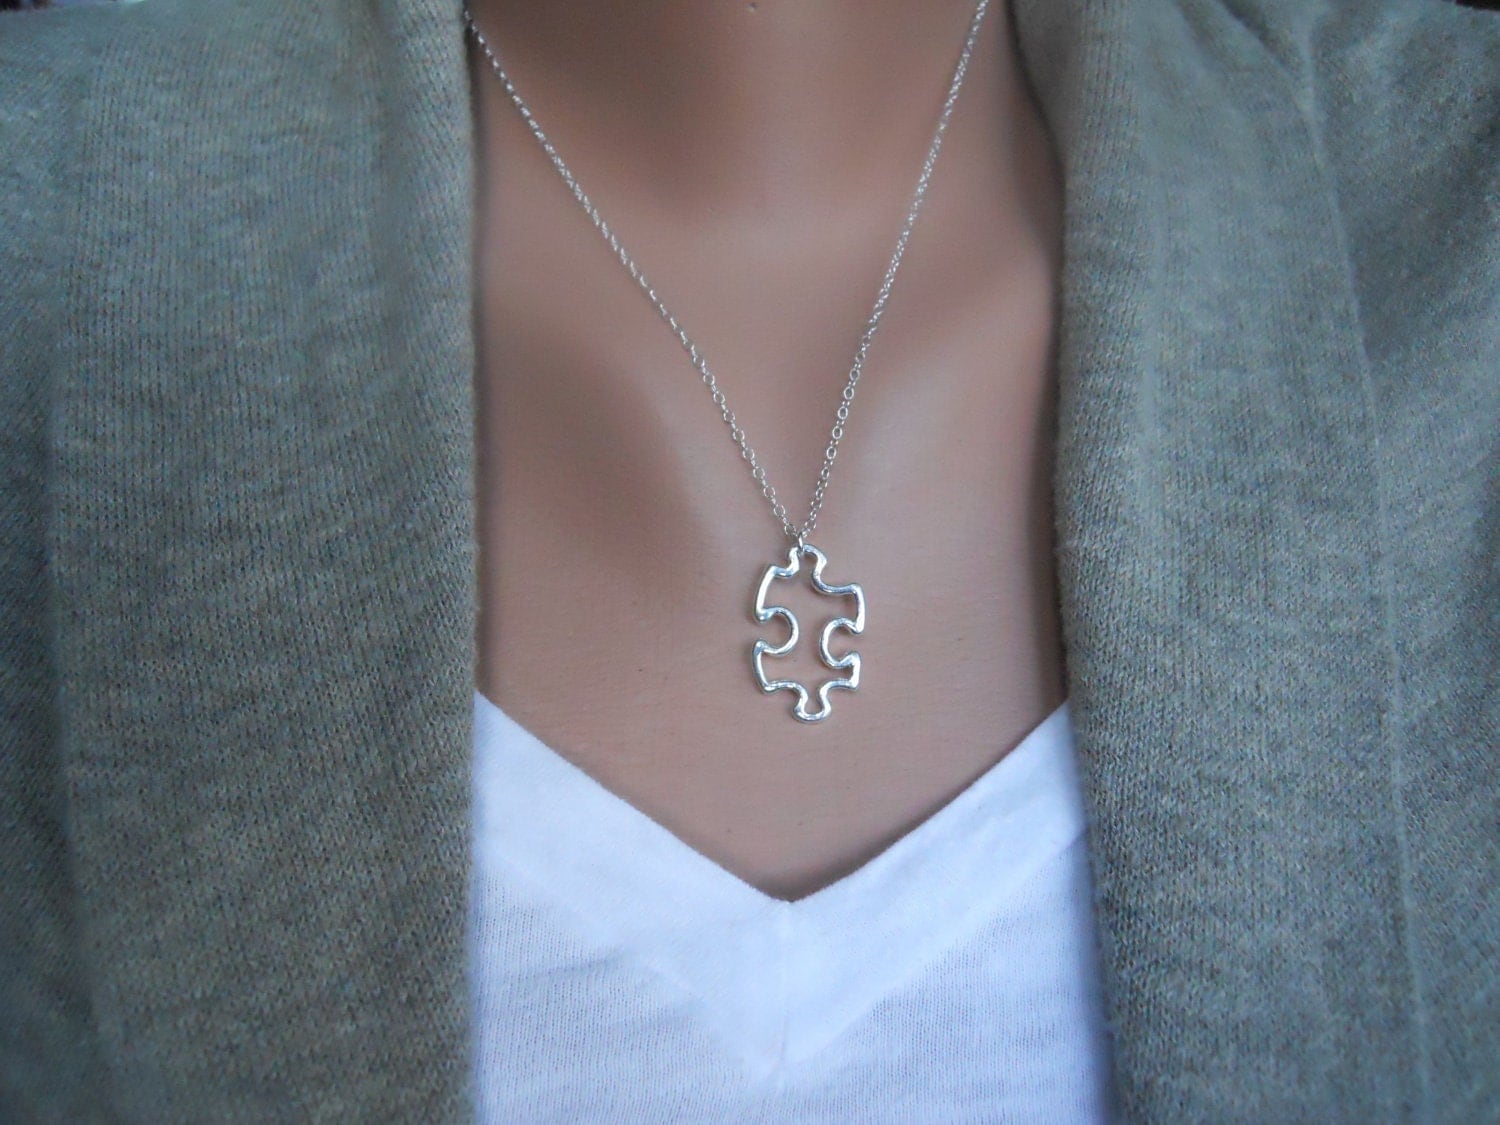 Puzzle Piece Necklace by thelovelyraindrop on Etsy